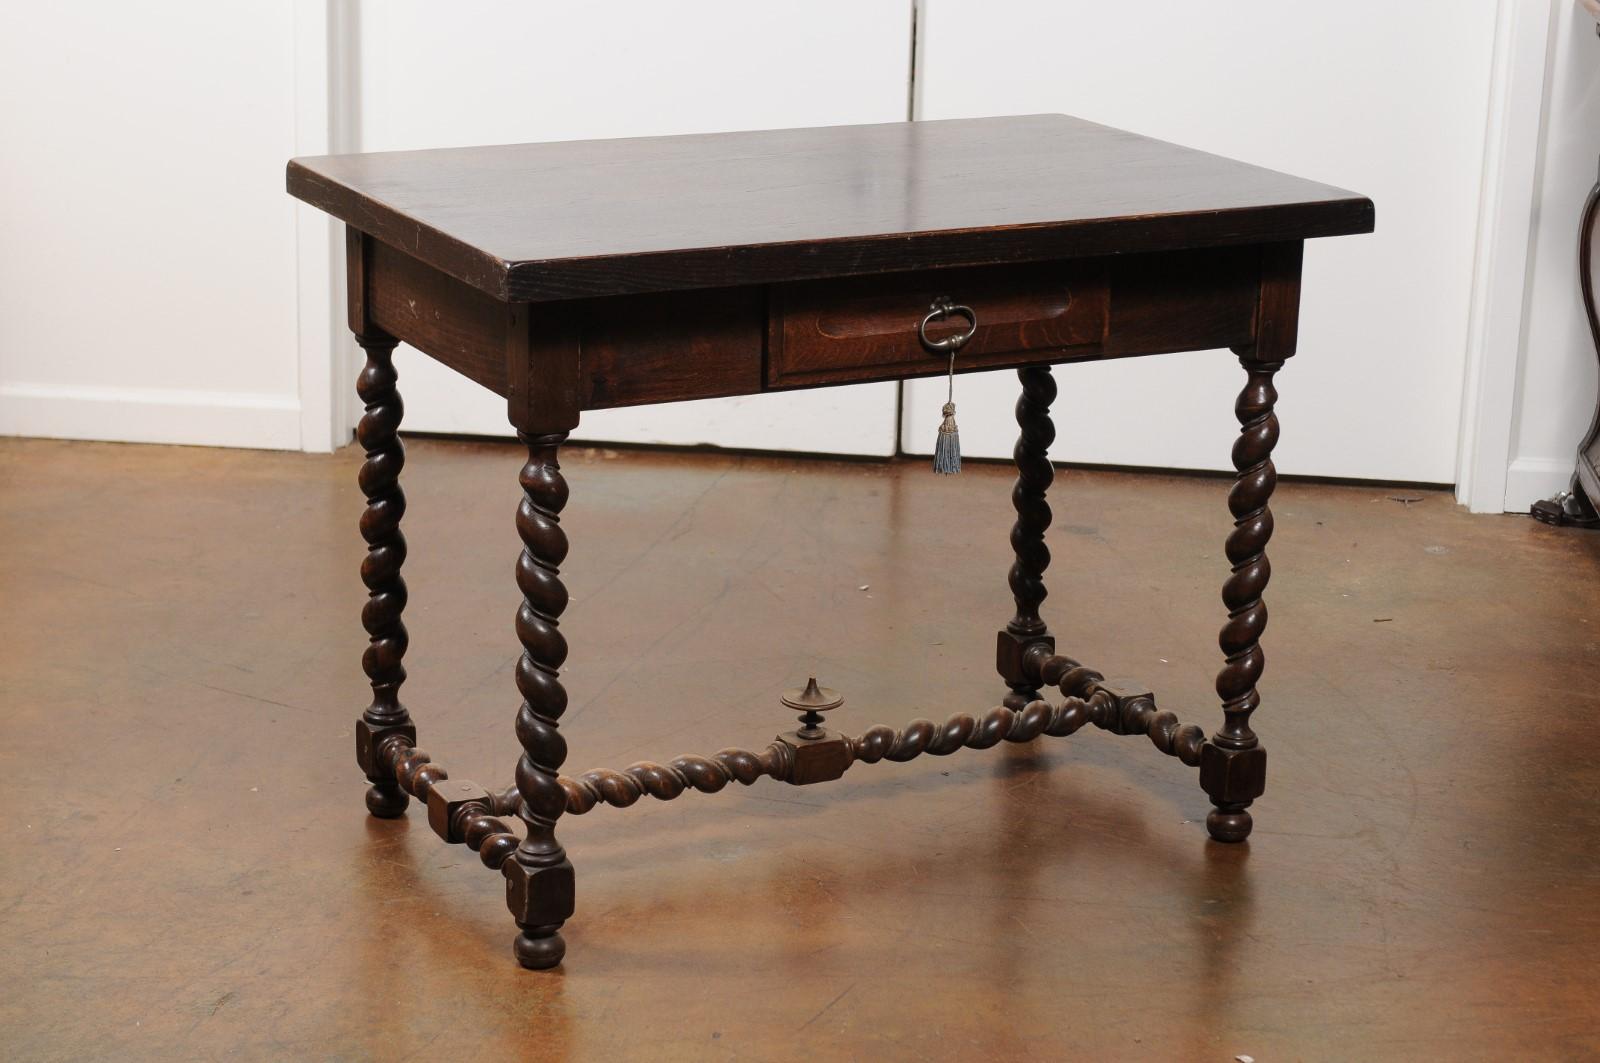 A French Louis XIII style walnut desk from the 19th century, with barley twist base. Born in France during the 19th century, this French walnut writing table features a rectangular top sitting above a single dovetailed drawer. The table is raised on